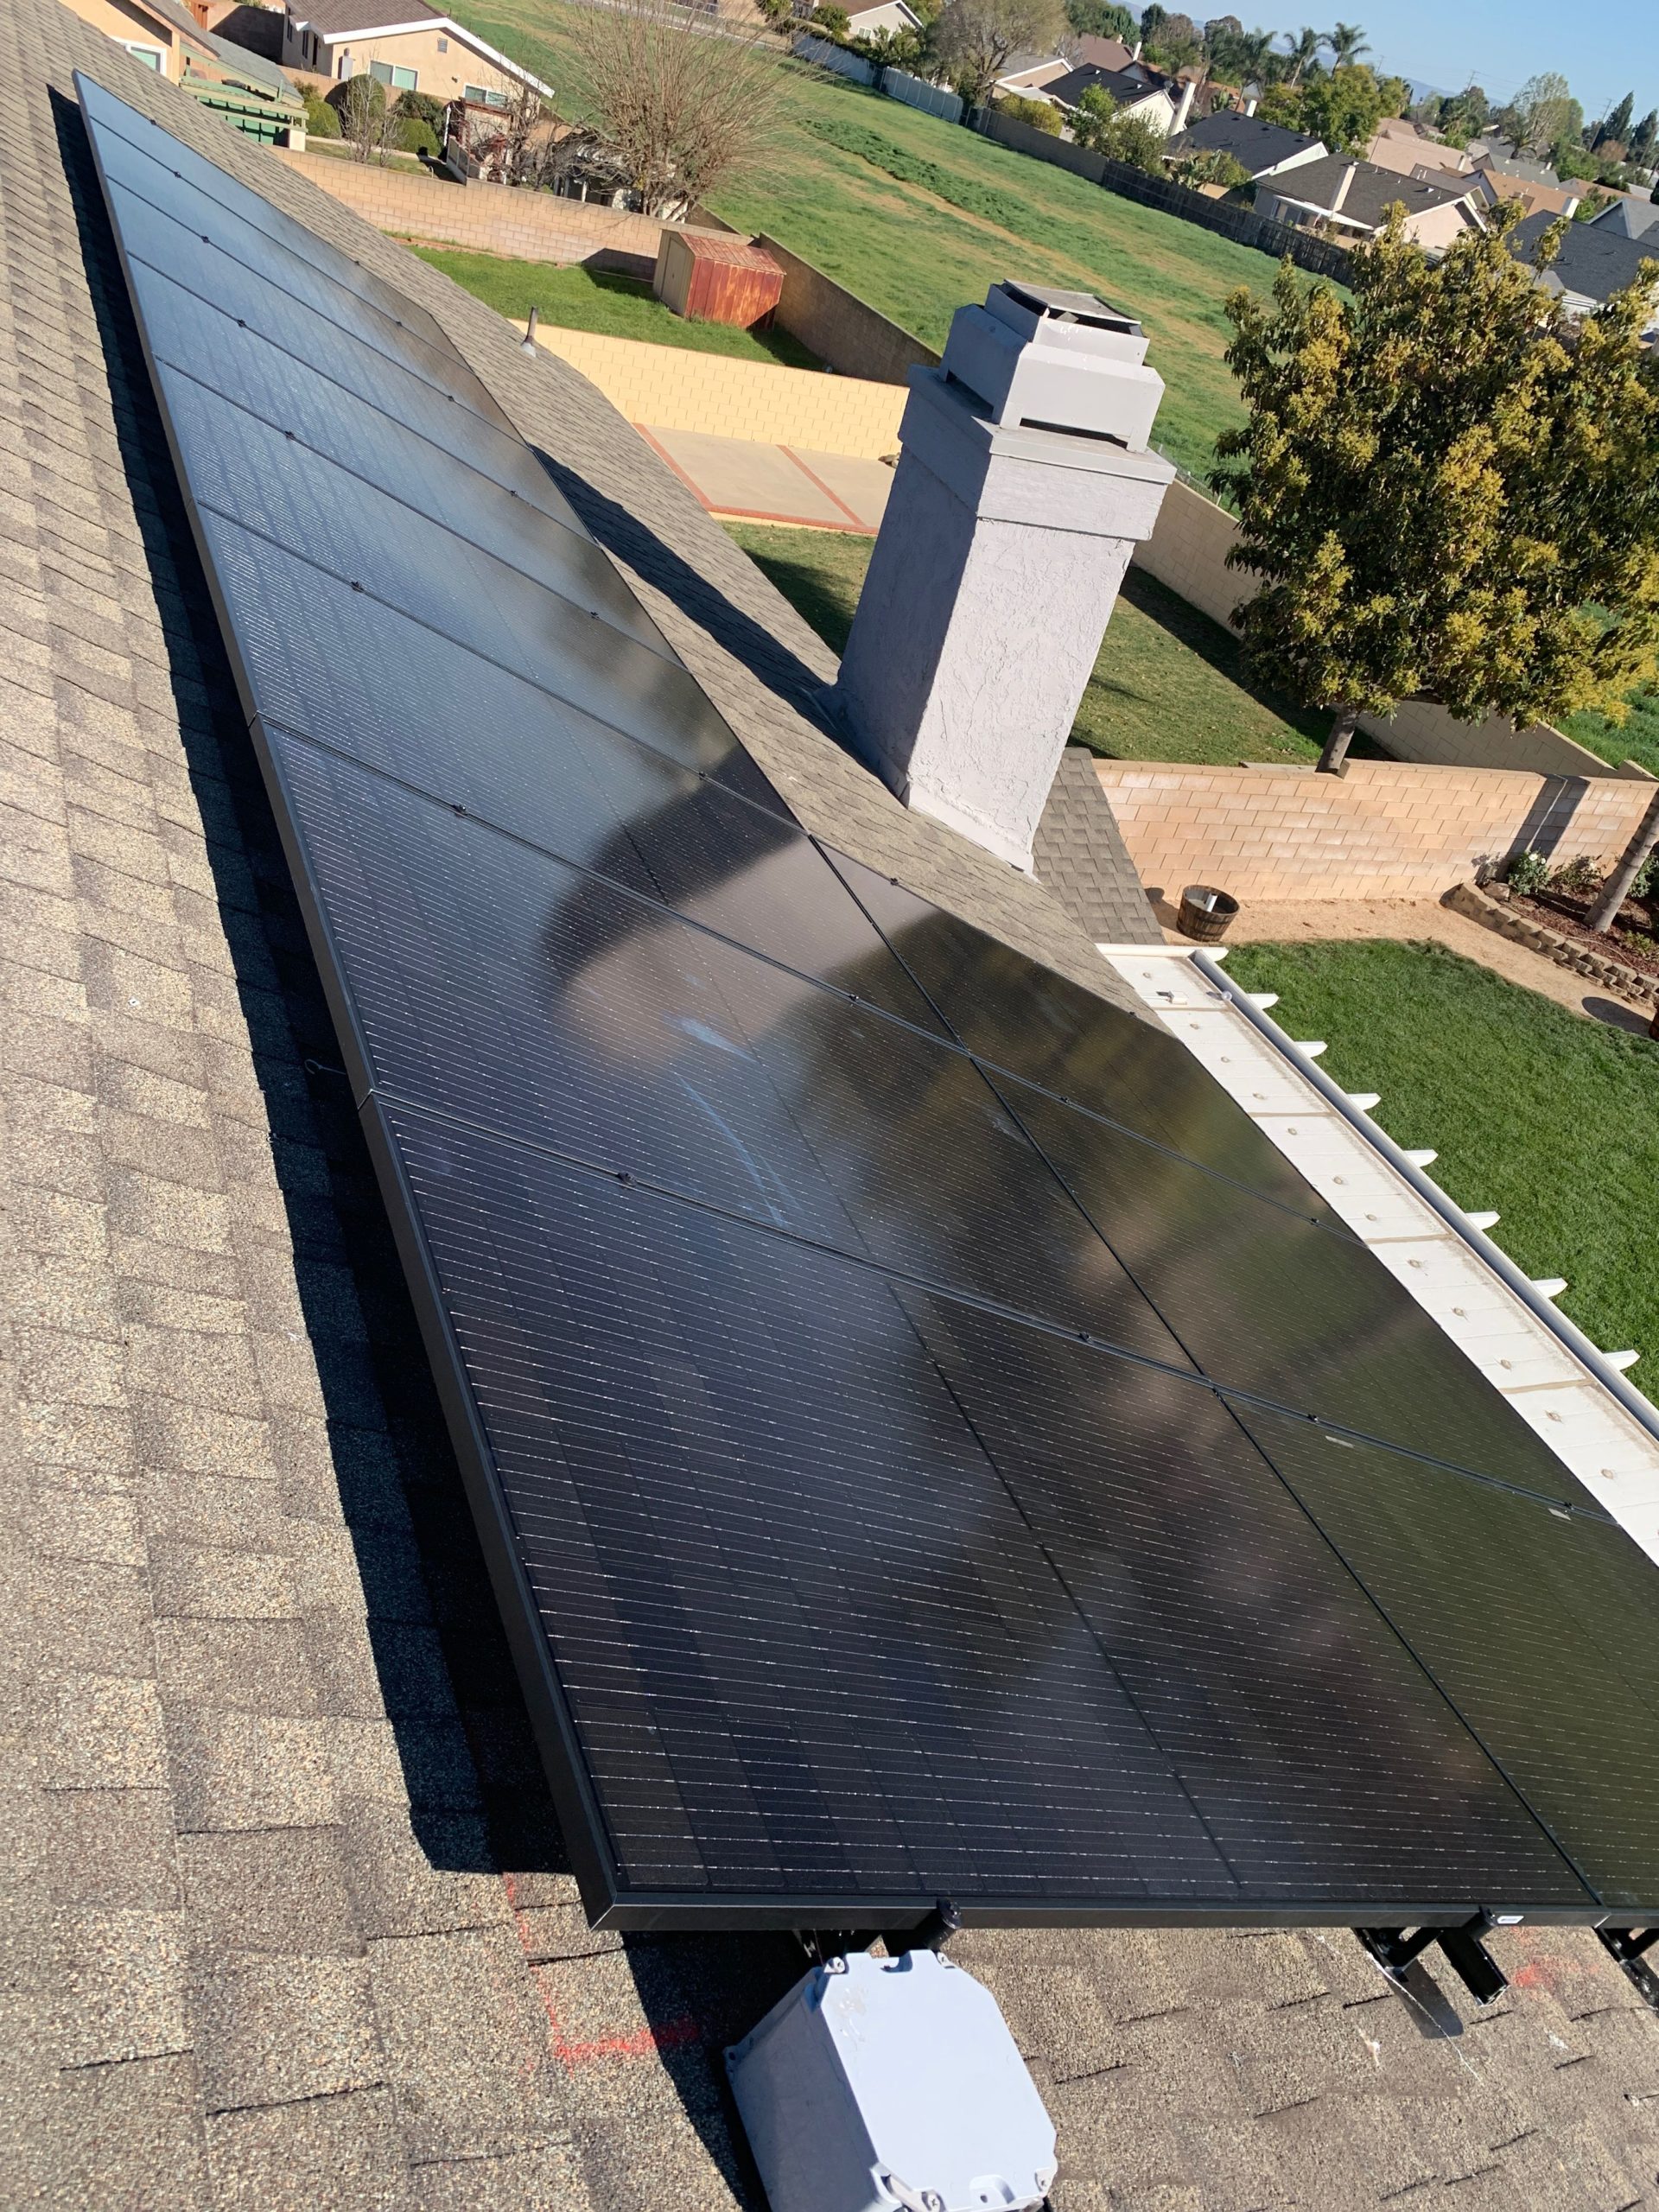 Solar panels installed on a home's roof.